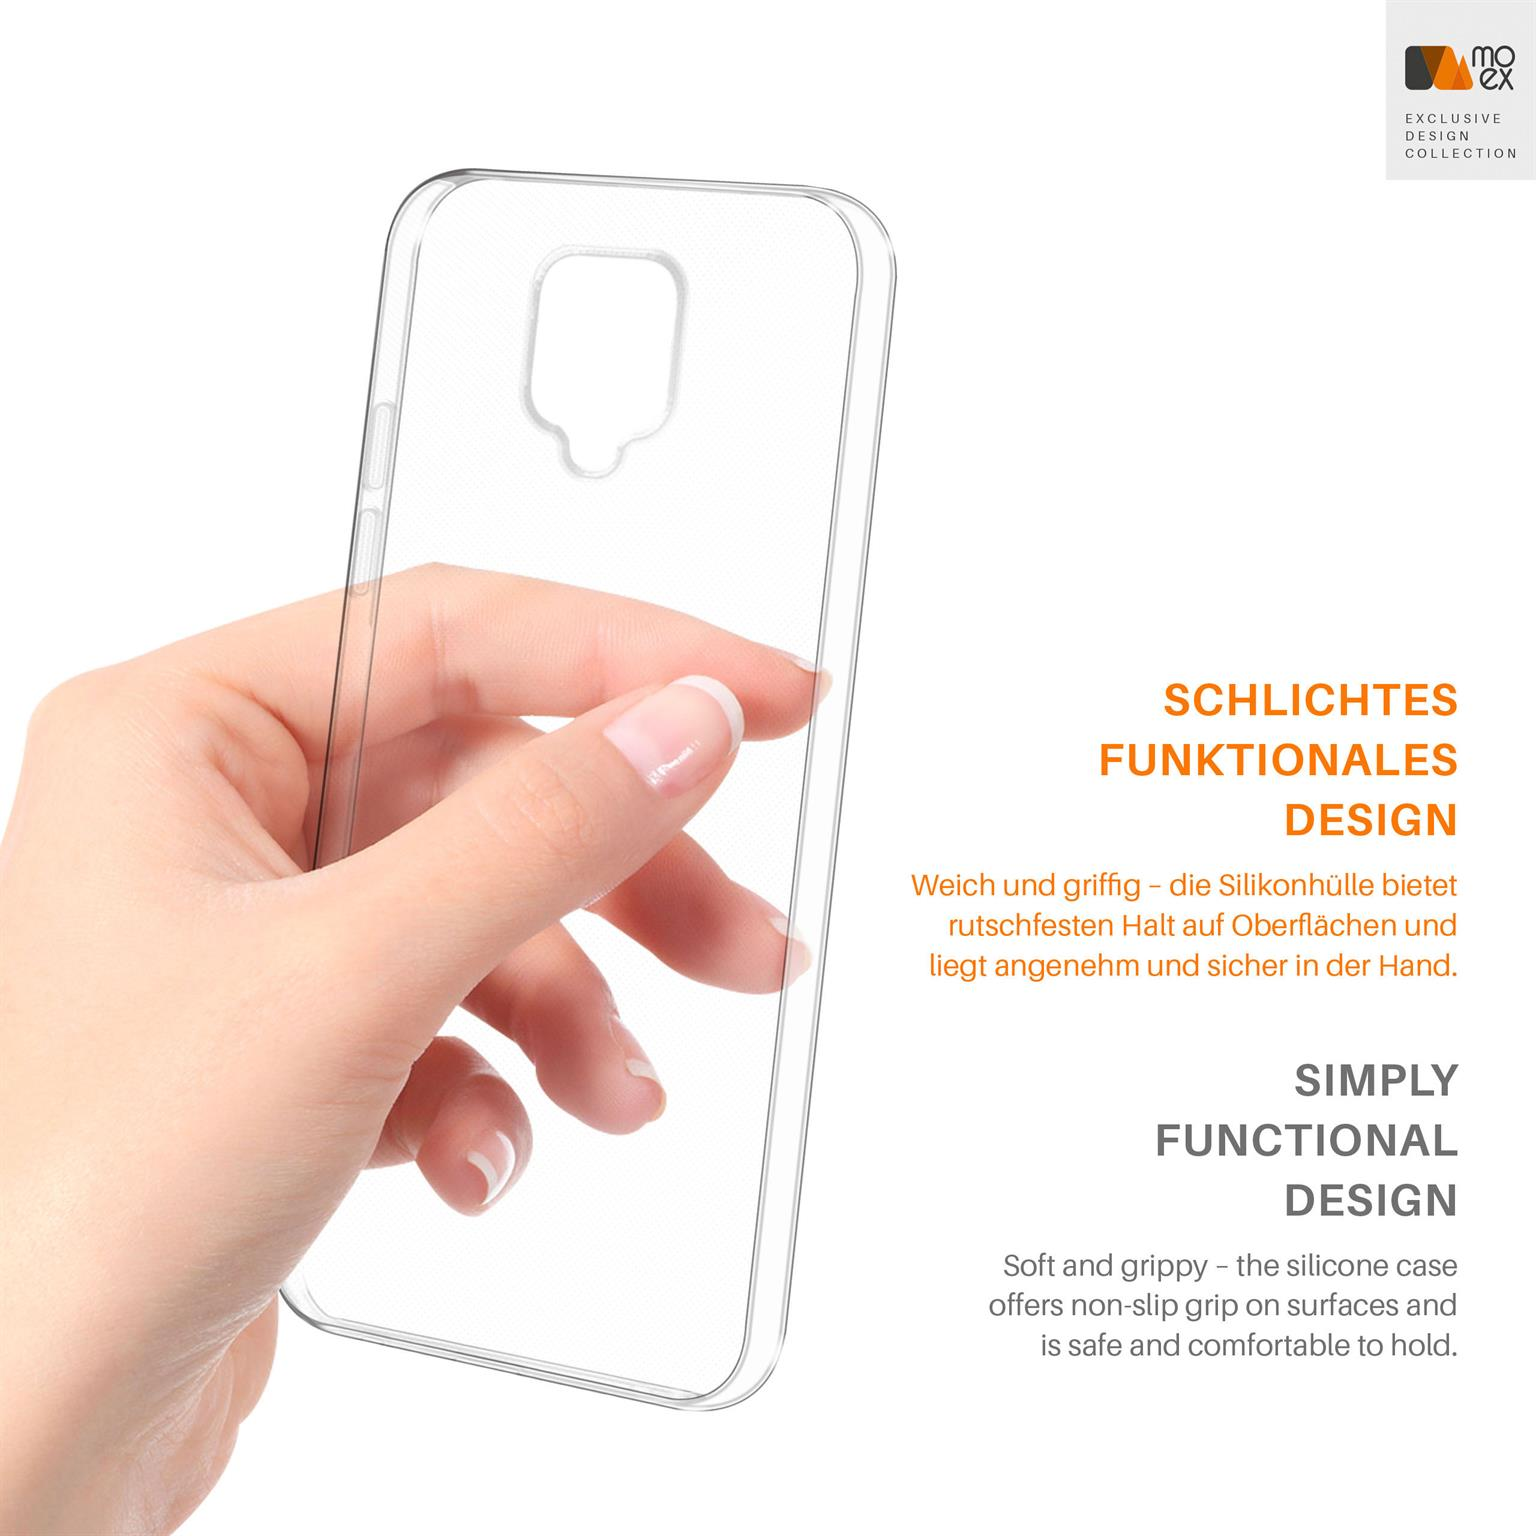 9 Backcover, Pro, MOEX Crystal-Clear Note Aero Case, Xiaomi, Redmi